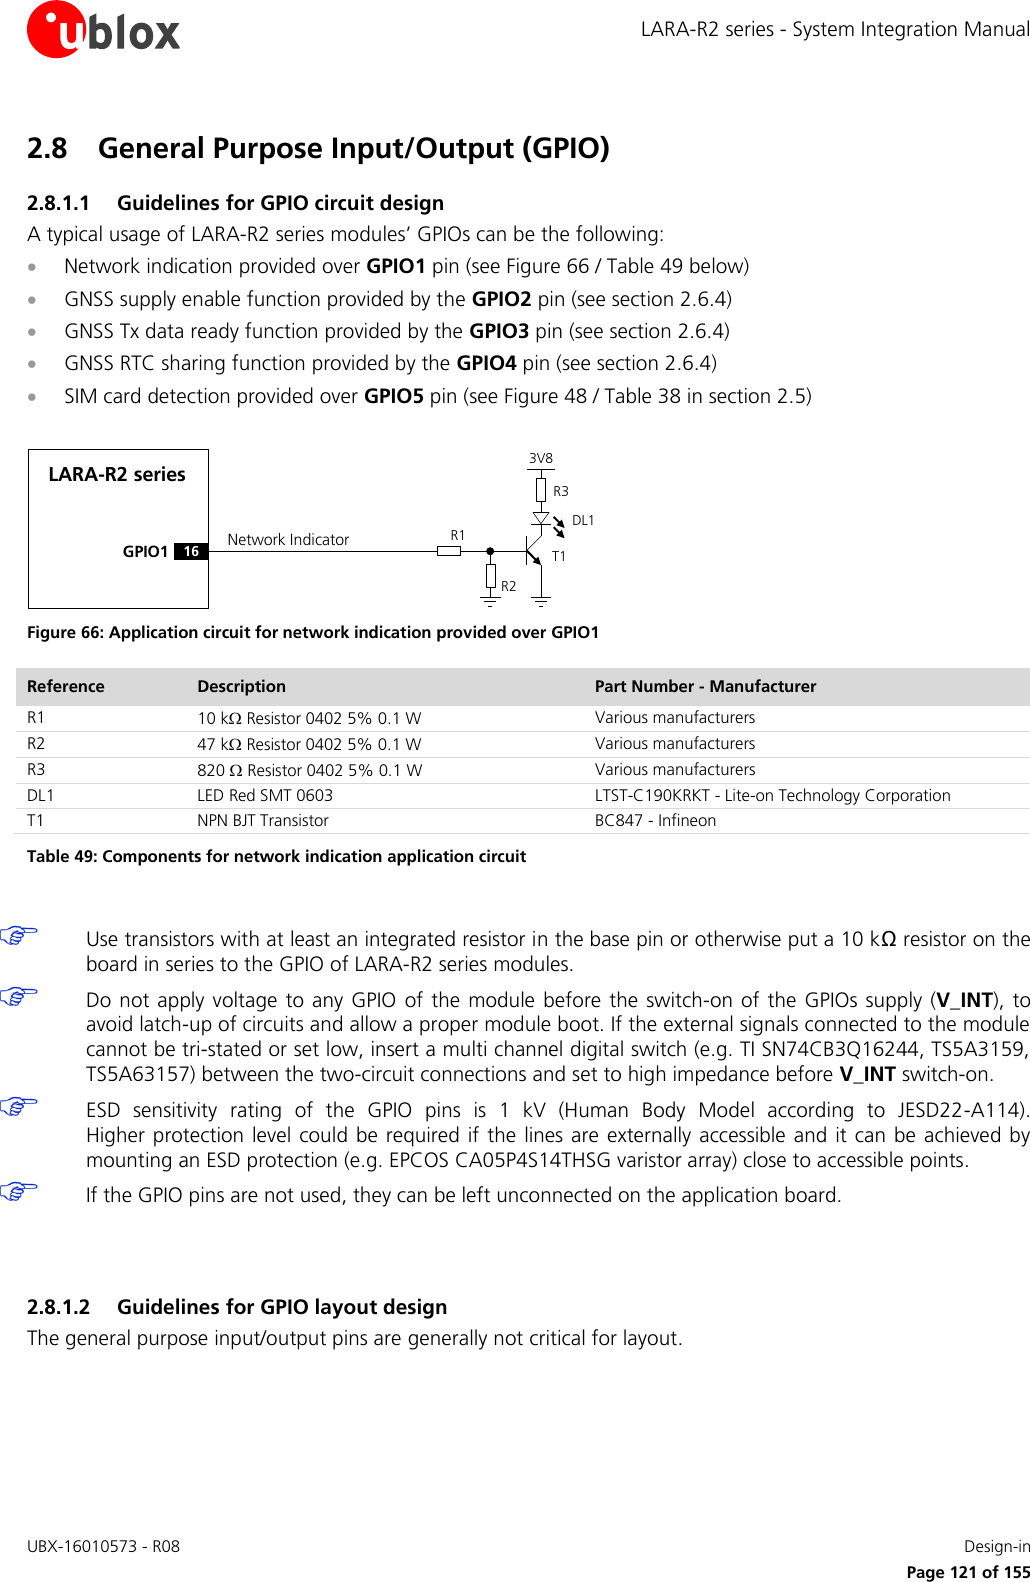 LARA-R2 series - System Integration Manual UBX-16010573 - R08    Design-in     Page 121 of 155 2.8 General Purpose Input/Output (GPIO) 2.8.1.1 Guidelines for GPIO circuit design A typical usage of LARA-R2 series modules’ GPIOs can be the following:  Network indication provided over GPIO1 pin (see Figure 66 / Table 49 below)  GNSS supply enable function provided by the GPIO2 pin (see section 2.6.4)  GNSS Tx data ready function provided by the GPIO3 pin (see section 2.6.4)  GNSS RTC sharing function provided by the GPIO4 pin (see section 2.6.4)  SIM card detection provided over GPIO5 pin (see Figure 48 / Table 38 in section 2.5)  LARA-R2 seriesGPIO1R1R33V8Network IndicatorR216DL1T1 Figure 66: Application circuit for network indication provided over GPIO1 Reference Description Part Number - Manufacturer R1 10 k Resistor 0402 5% 0.1 W Various manufacturers R2 47 k Resistor 0402 5% 0.1 W Various manufacturers R3 820  Resistor 0402 5% 0.1 W Various manufacturers DL1 LED Red SMT 0603 LTST-C190KRKT - Lite-on Technology Corporation T1 NPN BJT Transistor BC847 - Infineon Table 49: Components for network indication application circuit   Use transistors with at least an integrated resistor in the base pin or otherwise put a 10 kΩ resistor on the board in series to the GPIO of LARA-R2 series modules.  Do not  apply voltage to any GPIO  of the module  before the switch-on of  the  GPIOs  supply  (V_INT), to avoid latch-up of circuits and allow a proper module boot. If the external signals connected to the module cannot be tri-stated or set low, insert a multi channel digital switch (e.g. TI SN74CB3Q16244, TS5A3159, TS5A63157) between the two-circuit connections and set to high impedance before V_INT switch-on.  ESD  sensitivity  rating  of  the  GPIO  pins  is  1  kV  (Human  Body  Model  according  to  JESD22-A114).  Higher protection level  could  be required if  the lines are  externally accessible and it can be  achieved  by mounting an ESD protection (e.g. EPCOS CA05P4S14THSG varistor array) close to accessible points.  If the GPIO pins are not used, they can be left unconnected on the application board.   2.8.1.2 Guidelines for GPIO layout design The general purpose input/output pins are generally not critical for layout.  